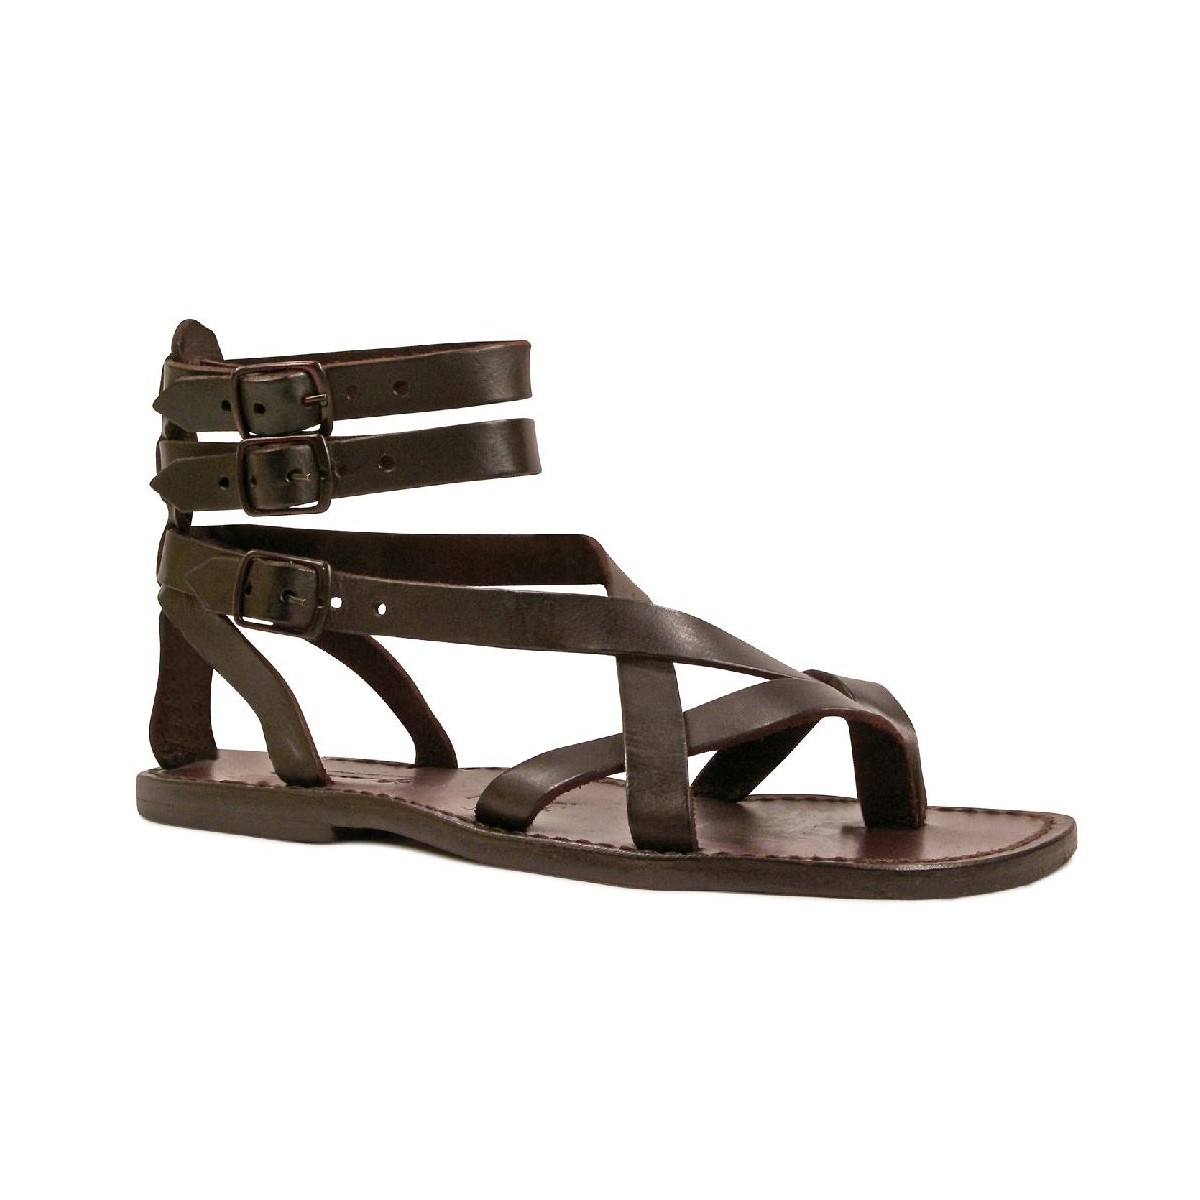 Brown men's gladiator sandals Handmade in Italy | The leather craftsmen